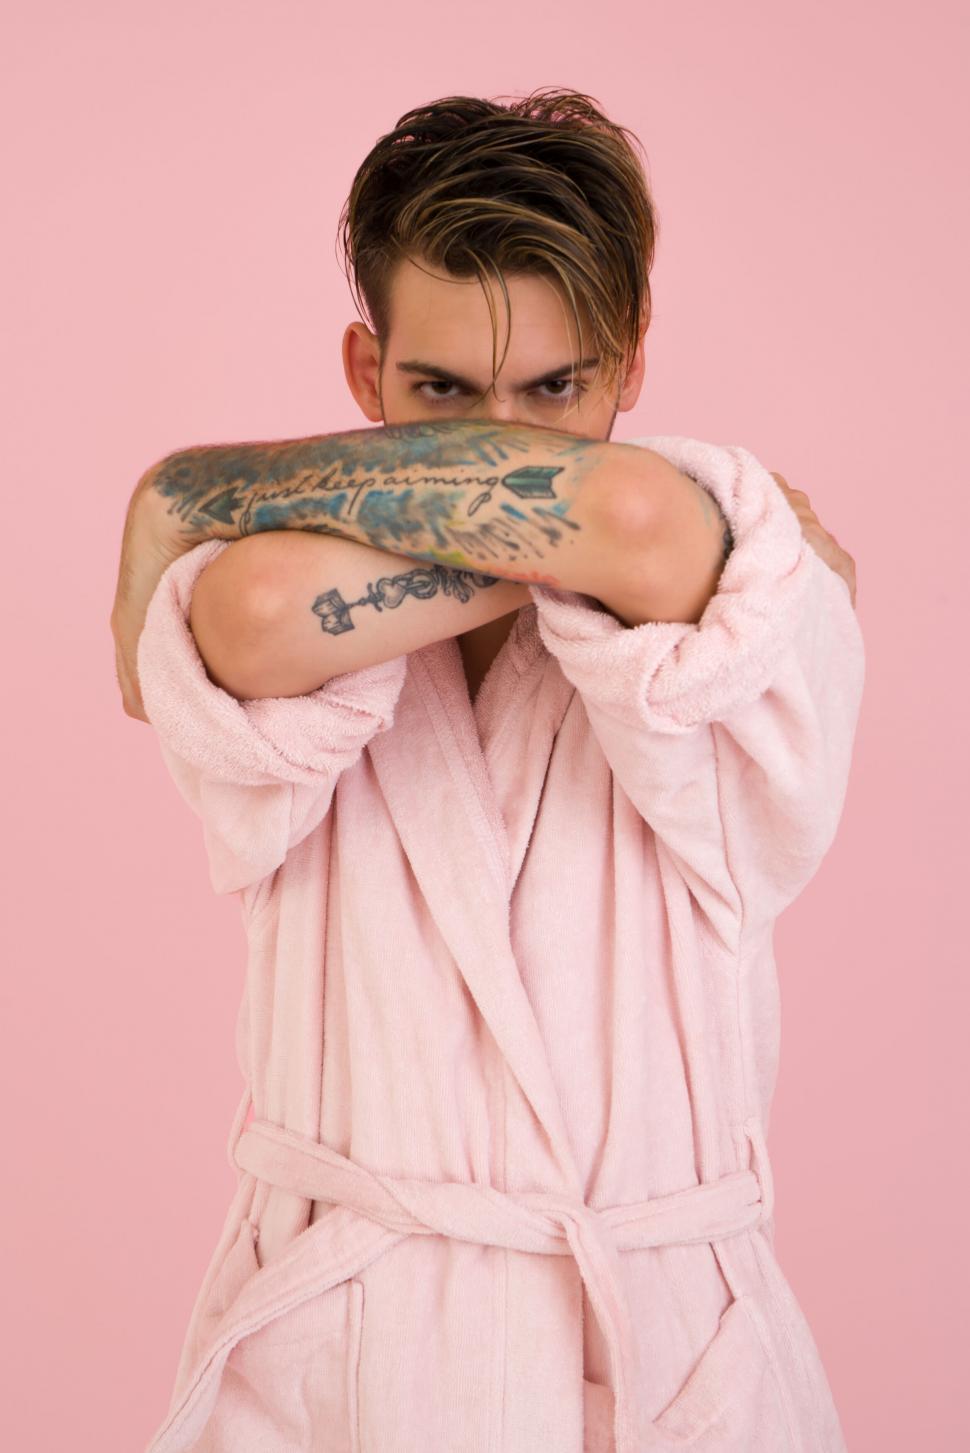 Free Image of Person in pink bathrobe with arms crossed and face hidden 